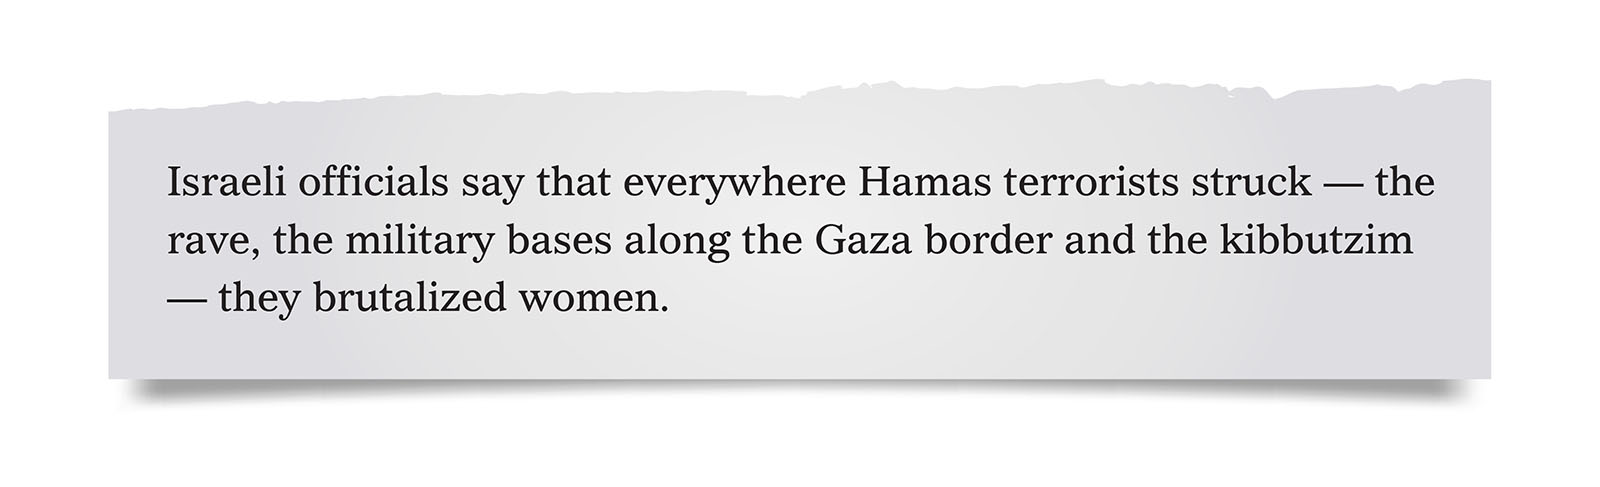 Pull quote:
Israeli officials say that everywhere Hamas terrorists struck — the rave, the military bases along the Gaza border and the kibbutzim — they brutalized women.